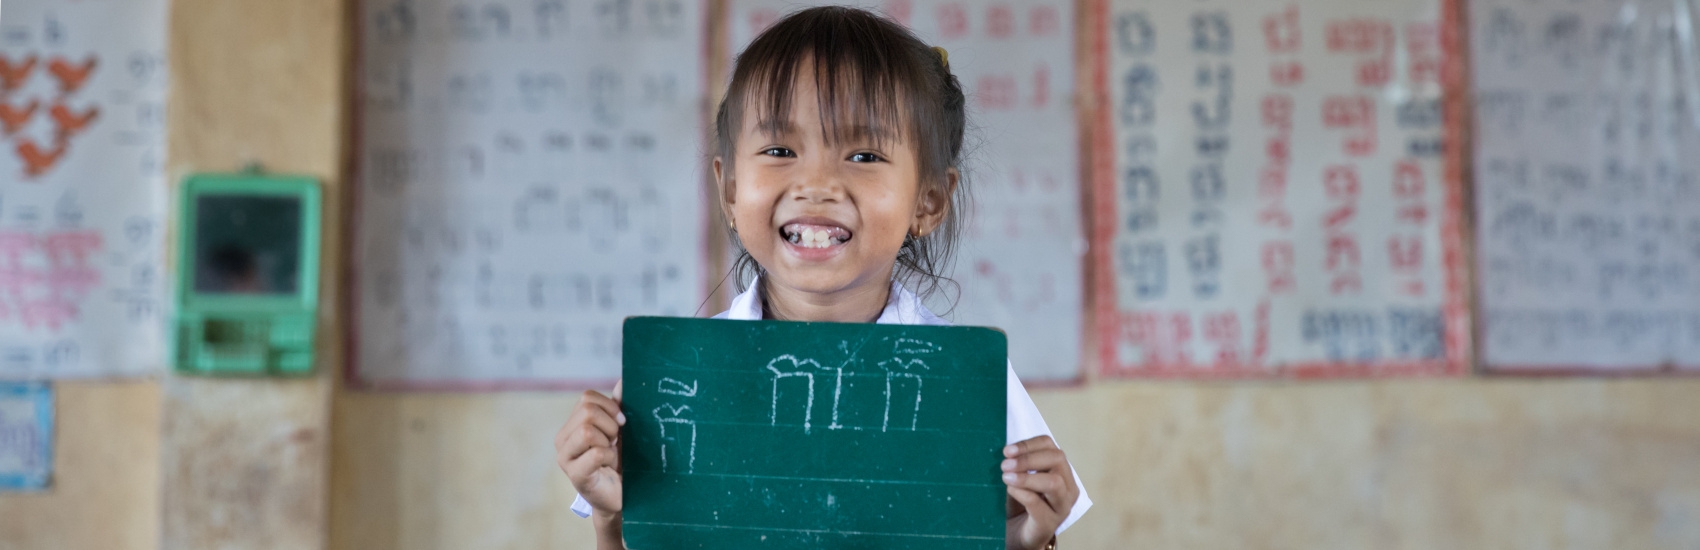 Little Monyrath, age 7, one of our First Read program students, stands at the front of her classroom, proudly holding a mini chalkboard displaying her work.